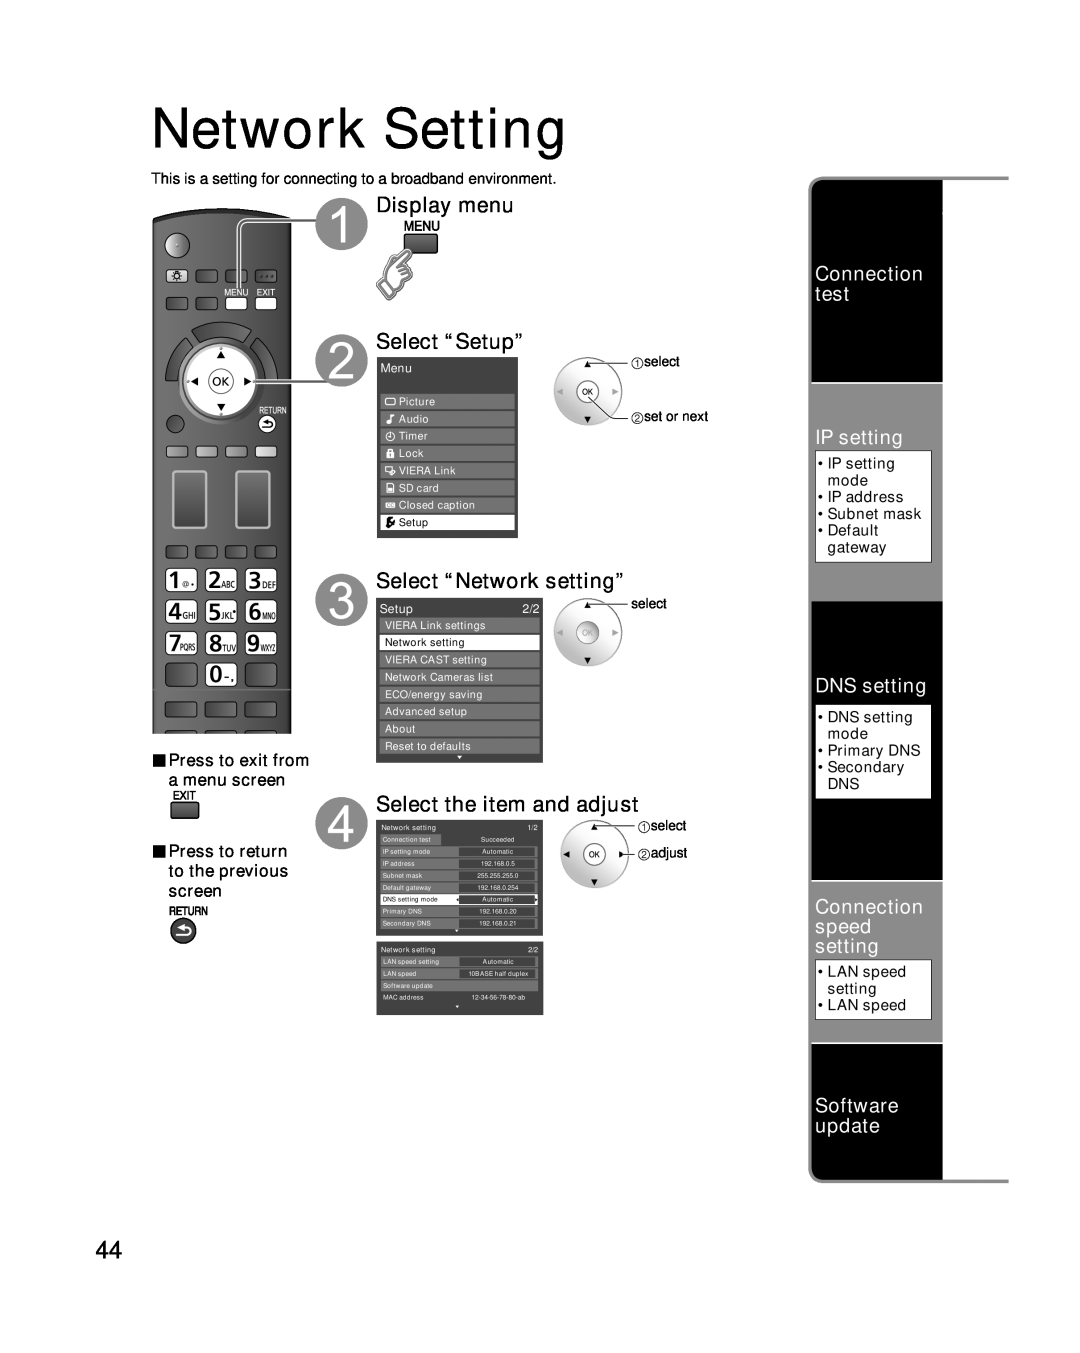 Panasonic TC-P54G10 Network Setting, Select “Network setting”, Select the item and adjust, Connection test IP setting 